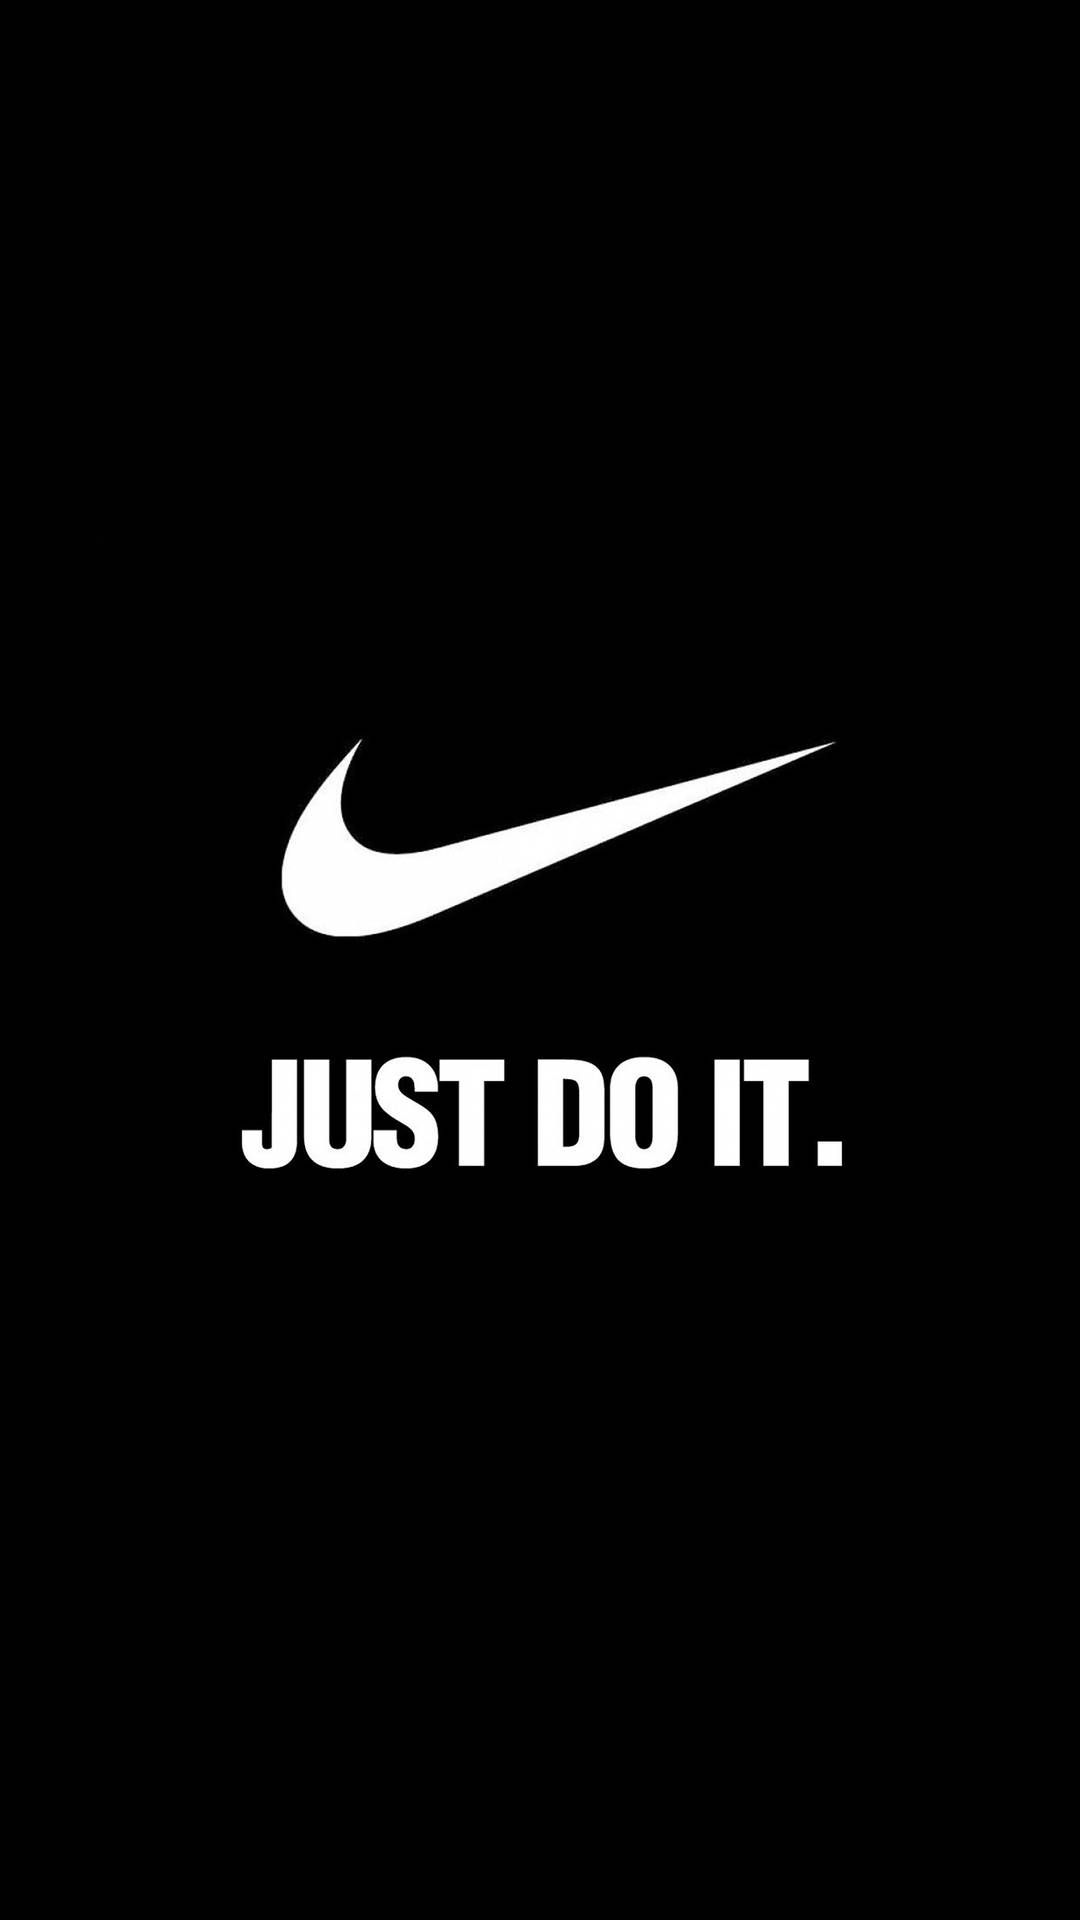 Nike Just Do It wallpaper for iPhone and Android - Nike